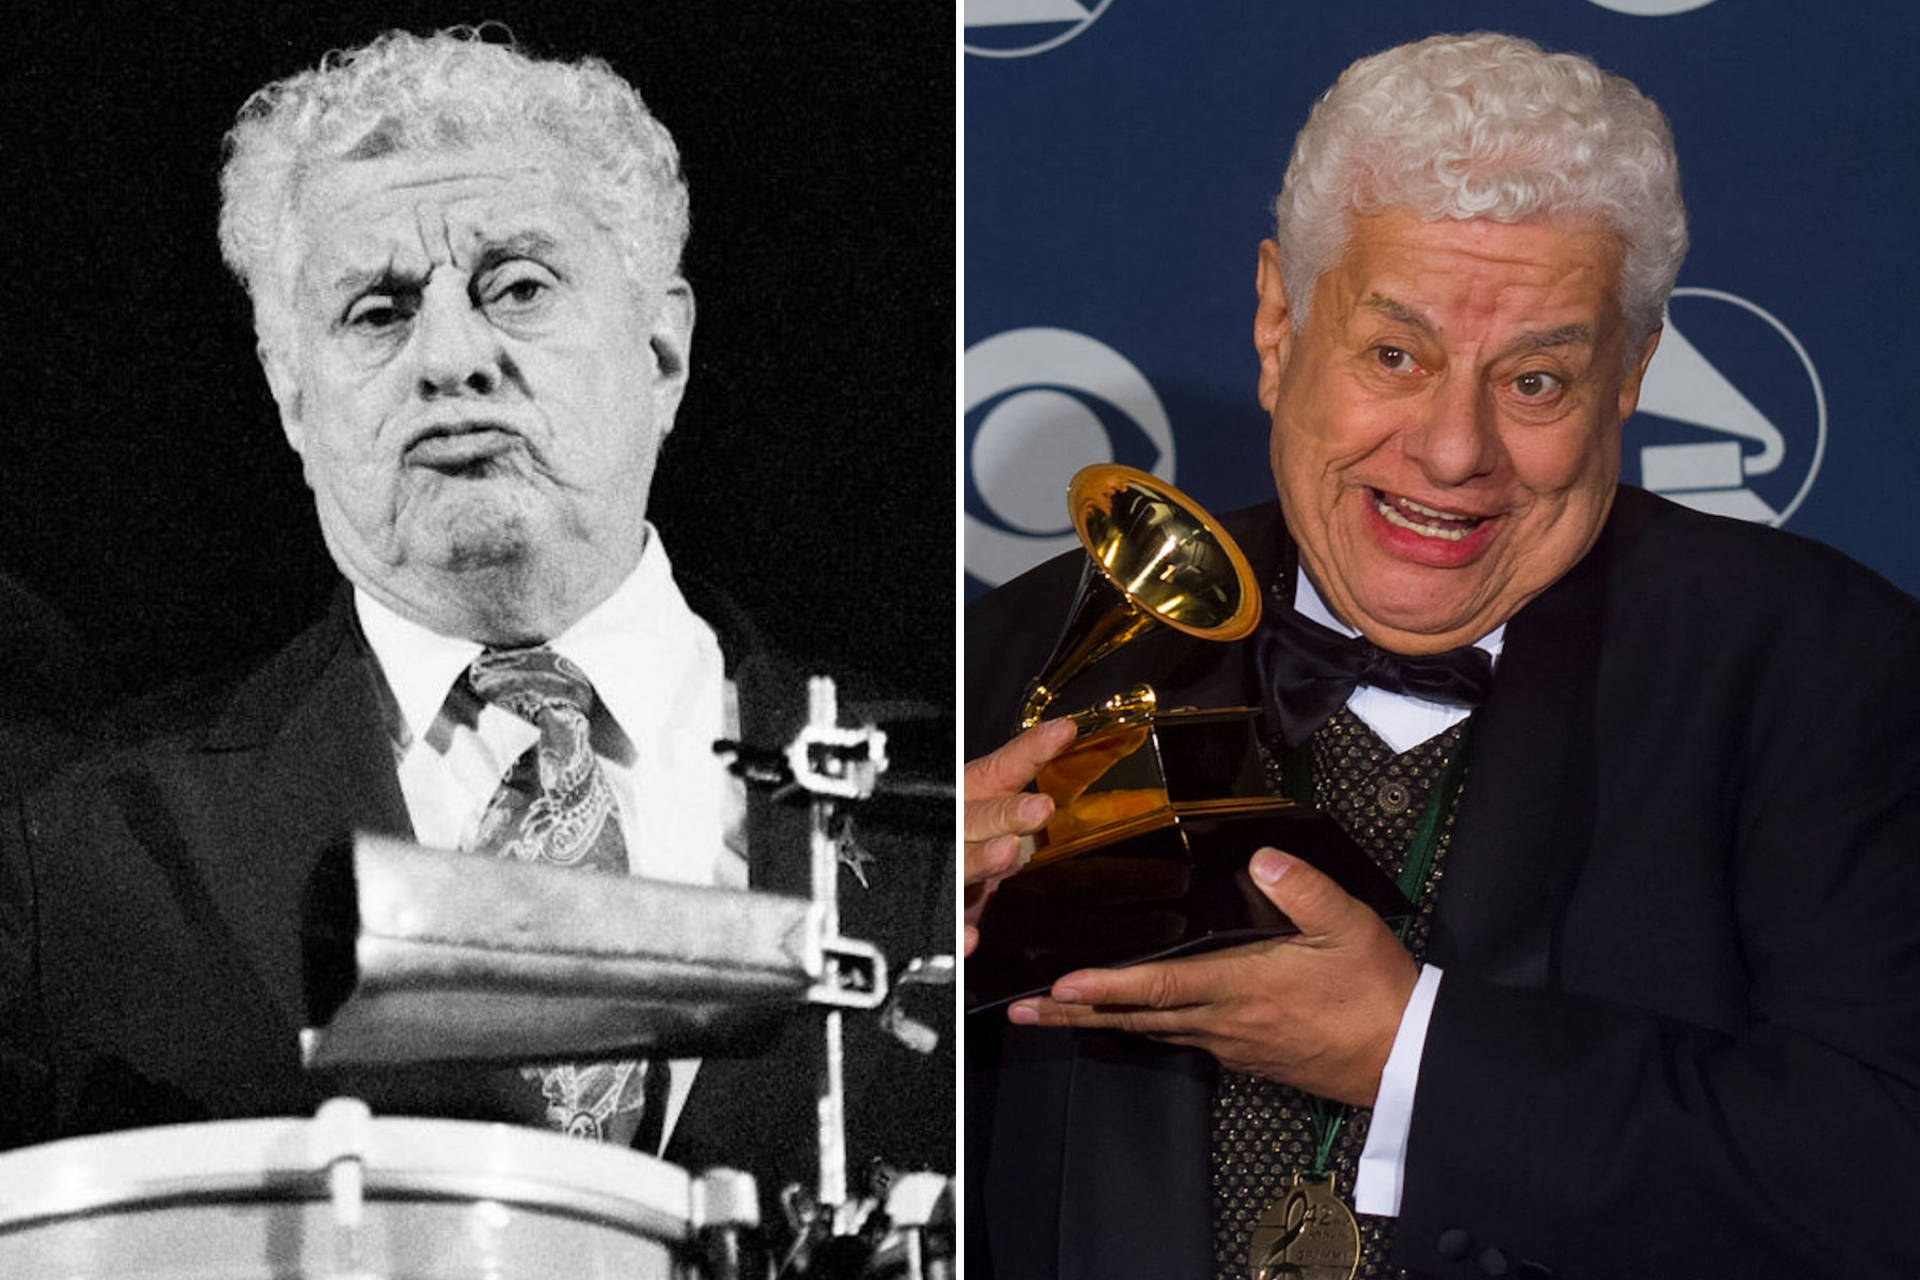 Caption: "Eclectic Collage of Music Legend, Tito Puente" Wallpaper